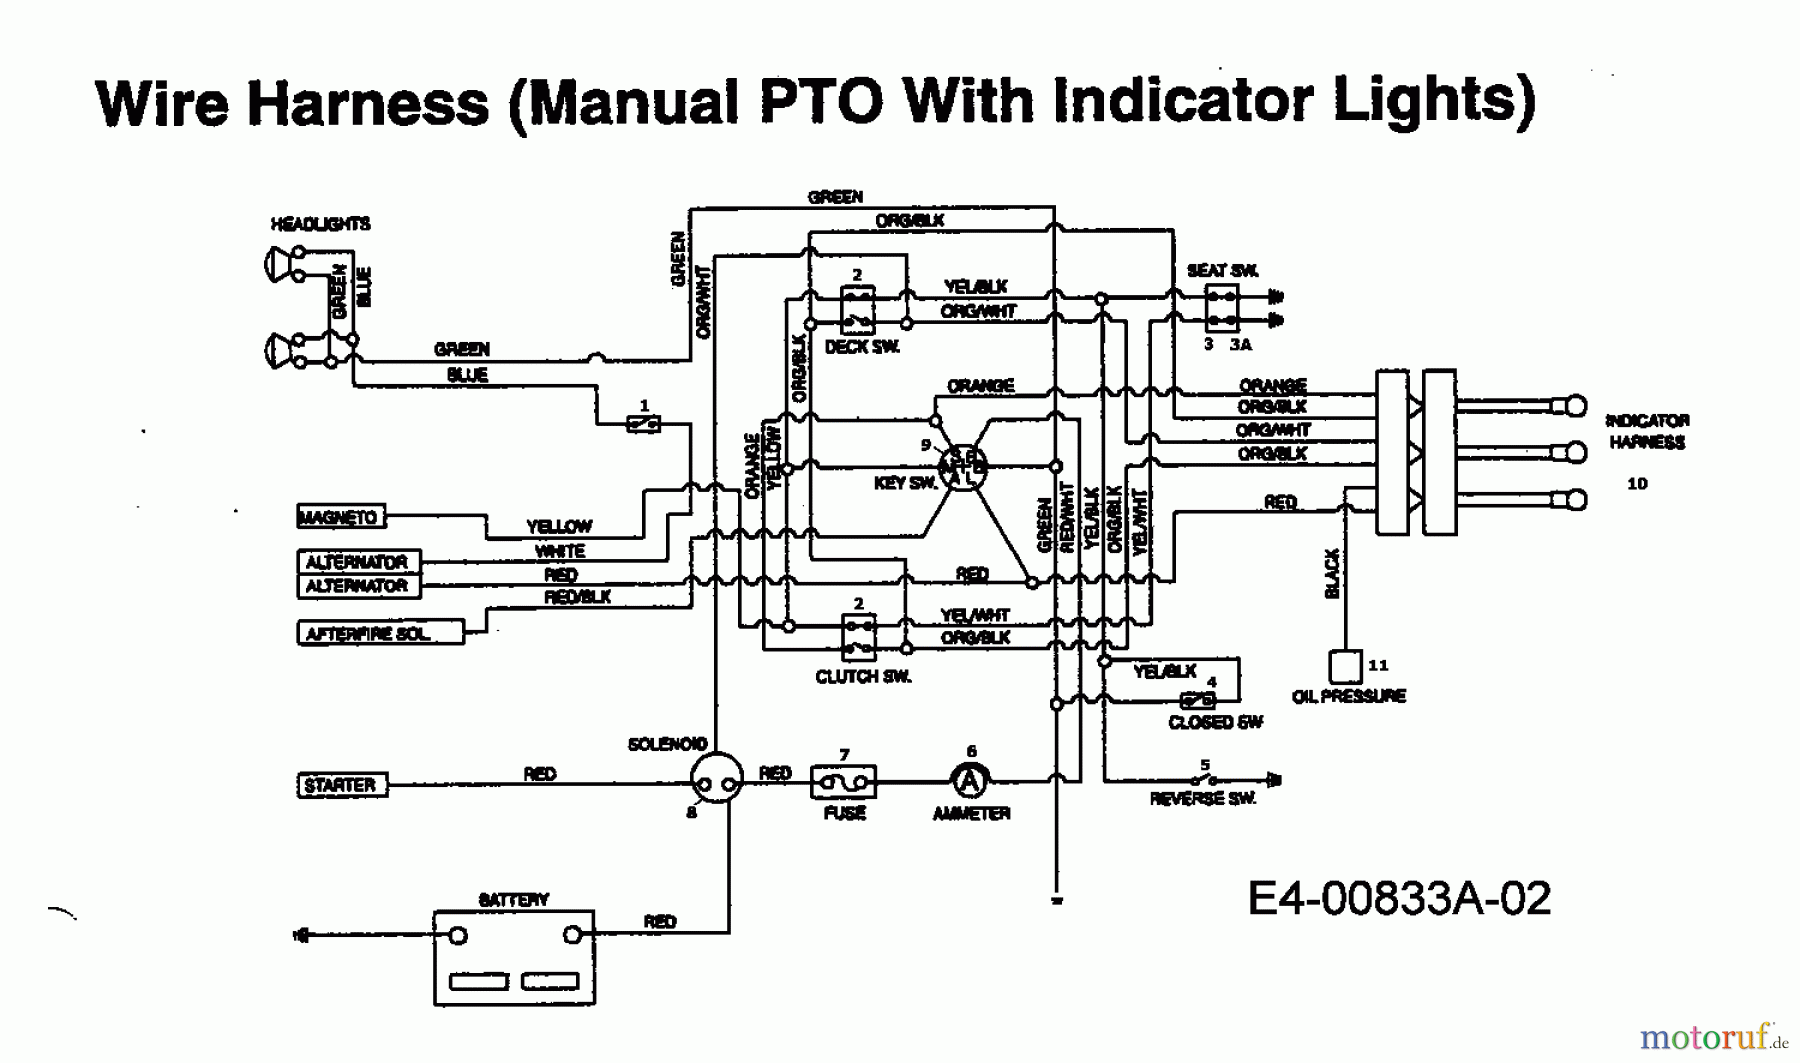  Mastercut Lawn tractors 145/102 H 13AM791N659  (1998) Wiring diagram with indicator lights